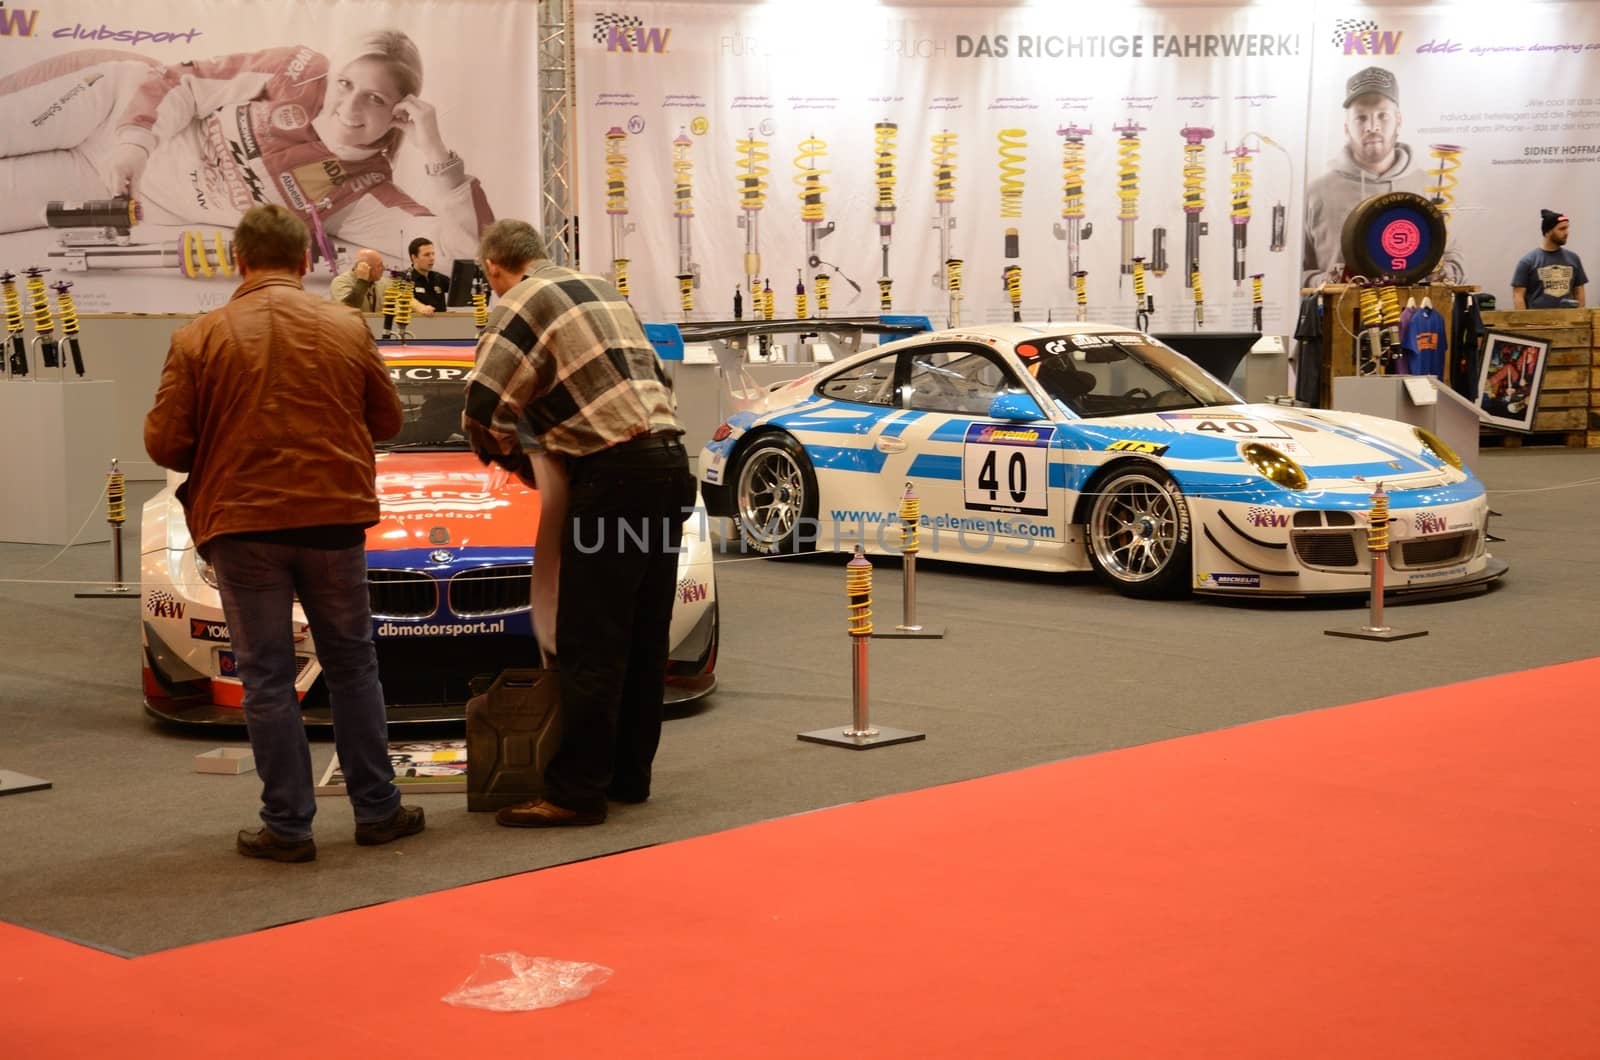 ESSEN, GERMANY - December 2: Visitors admire tunned cars BMW and Porsche during Essen Motor Show in Germany, on December 2, 2013.